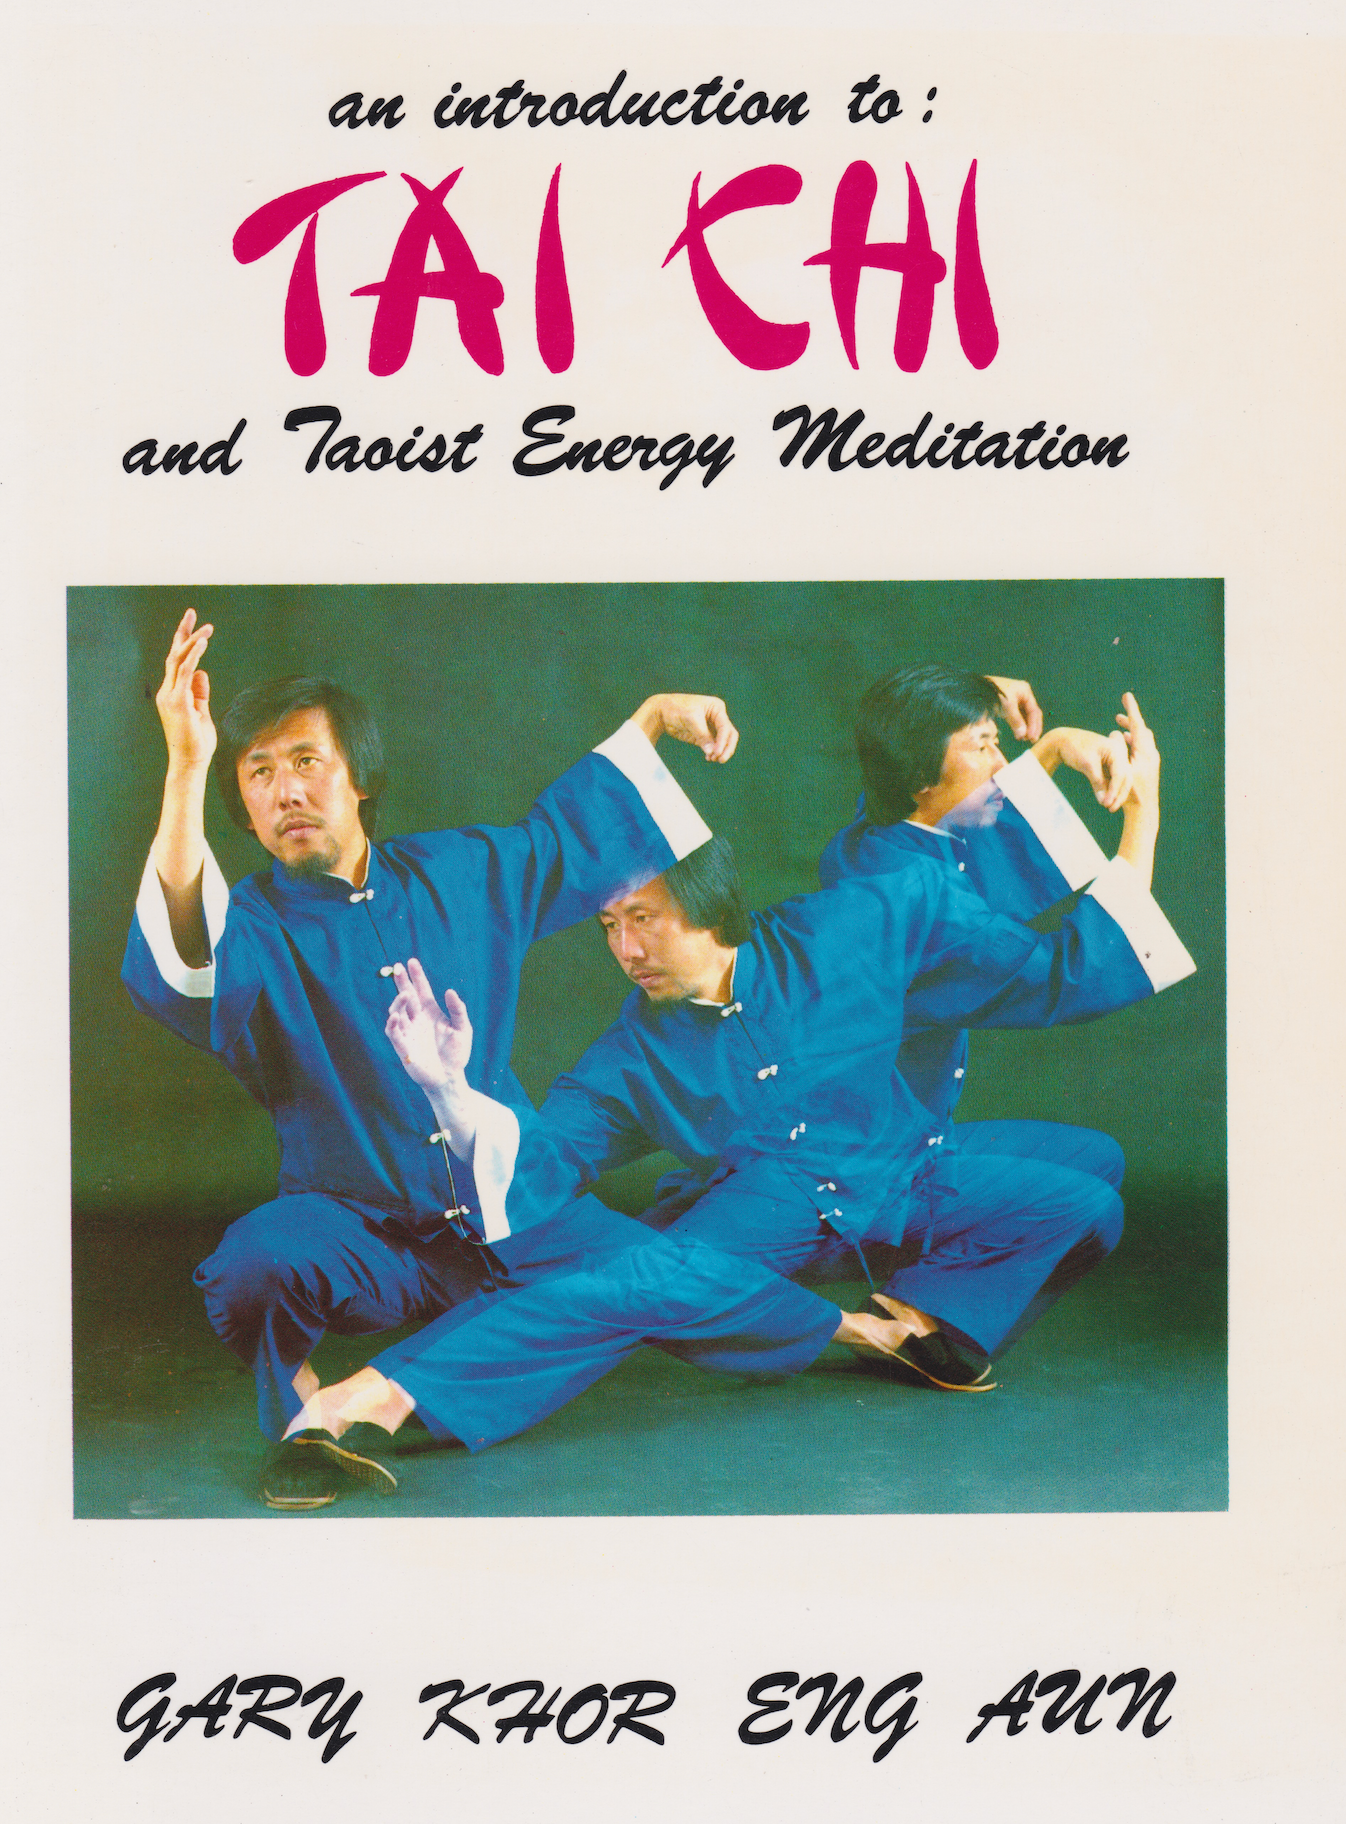 Intro to Tai Chi & Taoist Energy Meditation Book by Gary Khor Eng Aun (Preowned) - Budovideos Inc